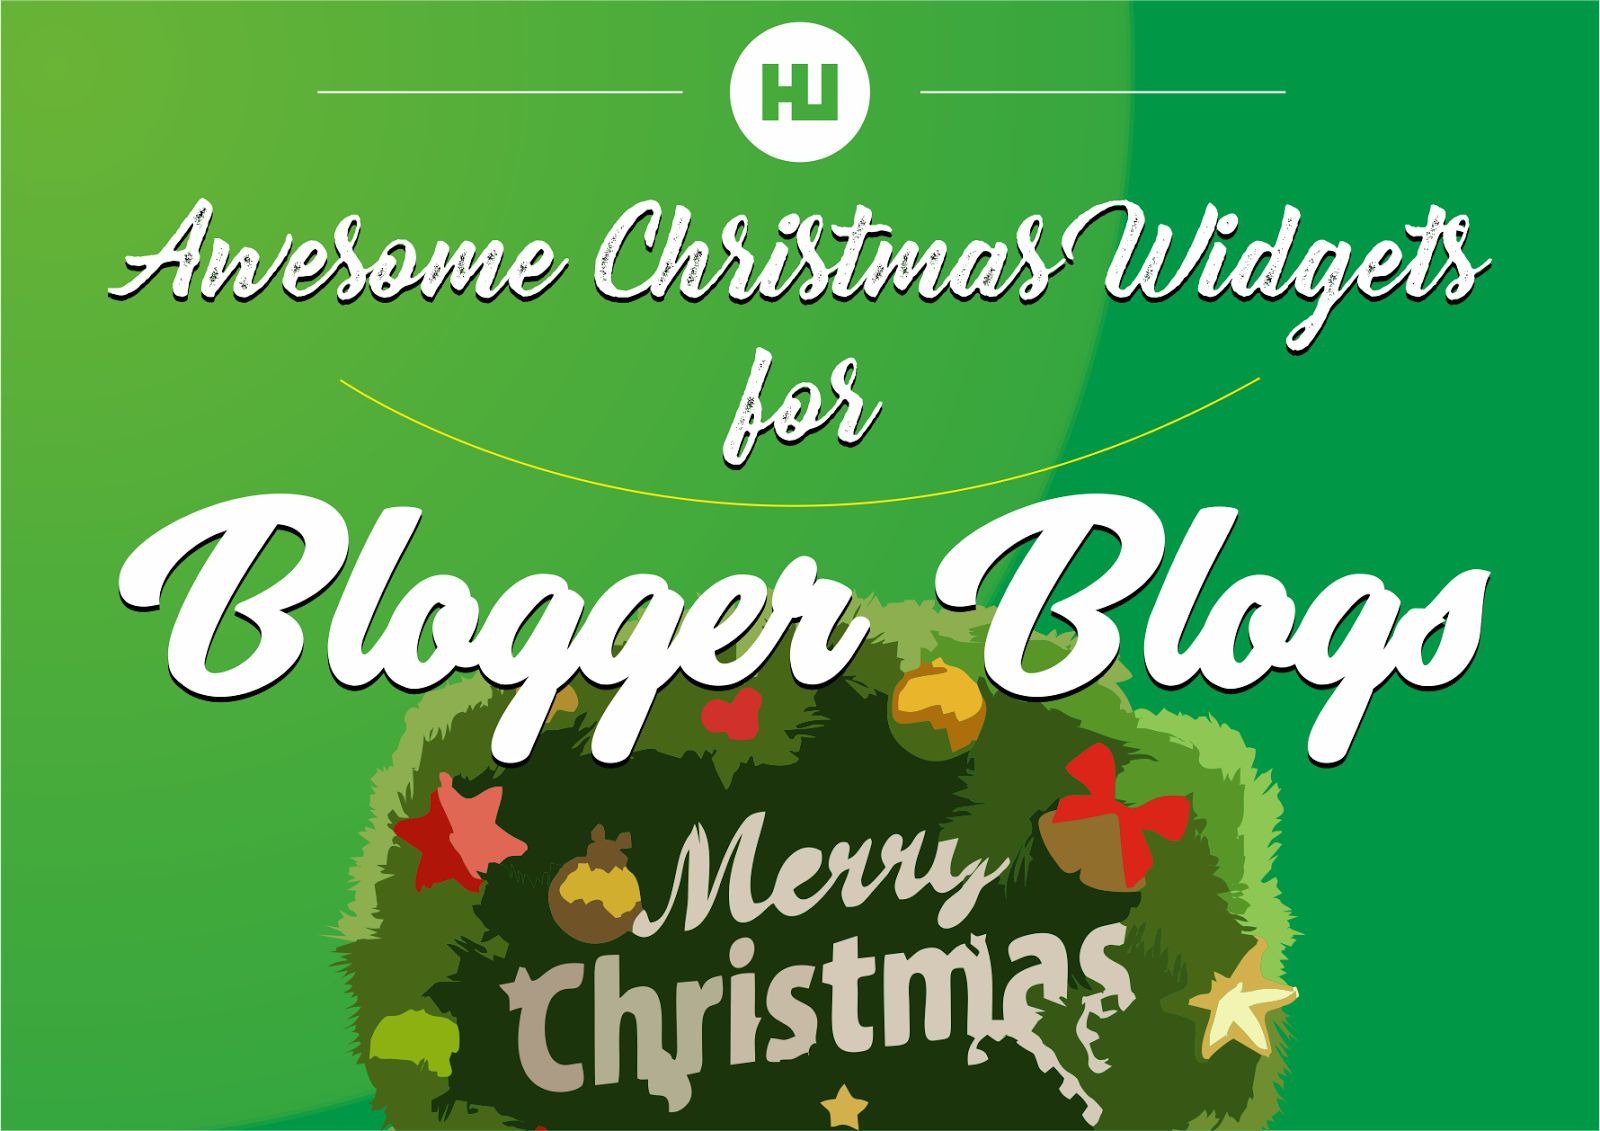 awesome christmas widgets for your blogger blogs by Hacking University